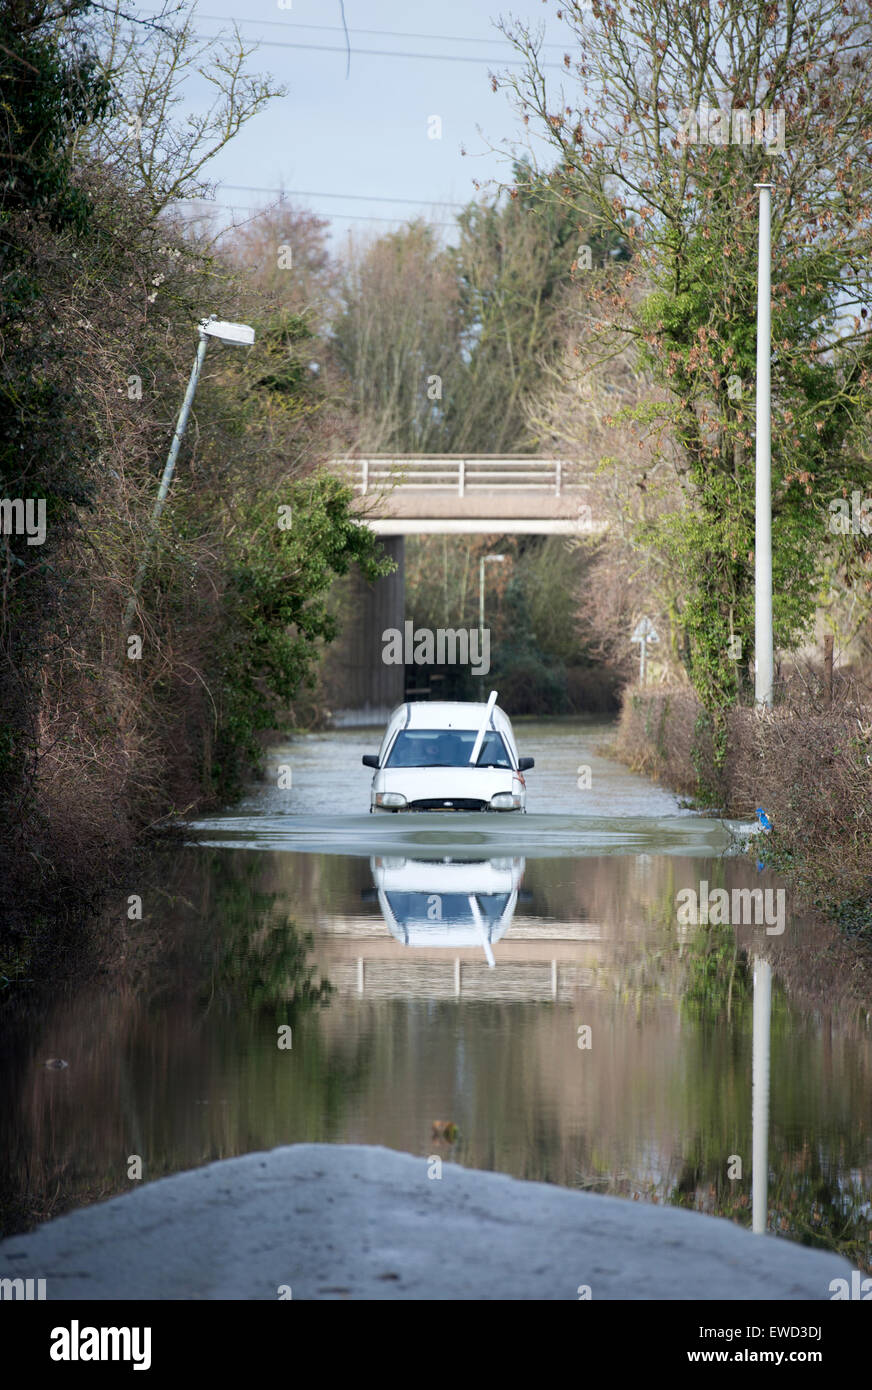 A van with an improvised snorkell tackles floodwater on Sandhurst Road, Gloucester Feb 2014 Stock Photo